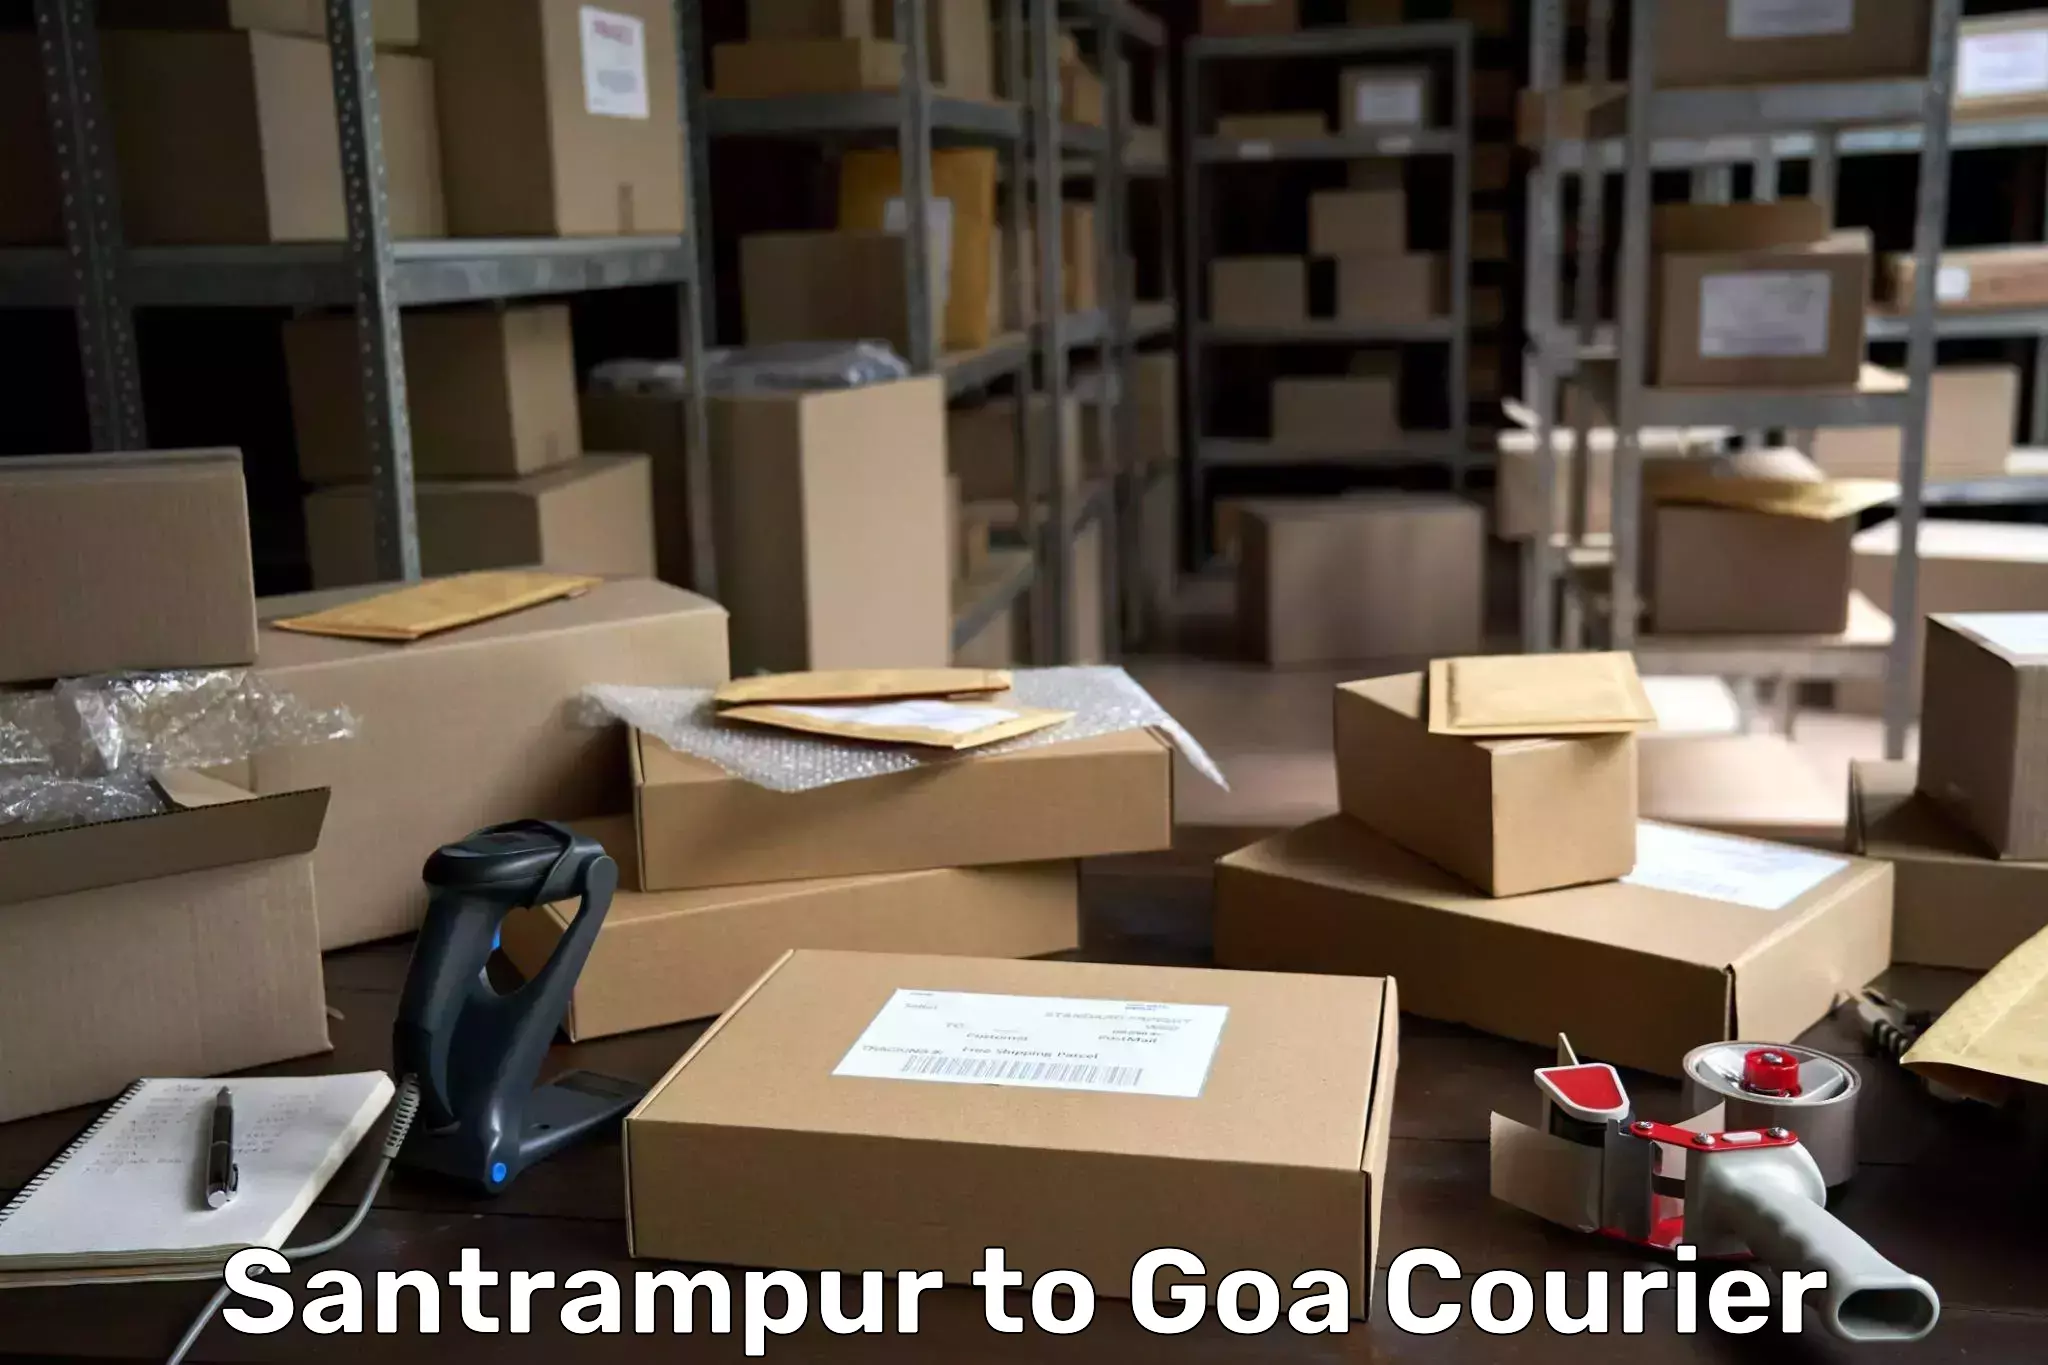 Express delivery capabilities Santrampur to Goa